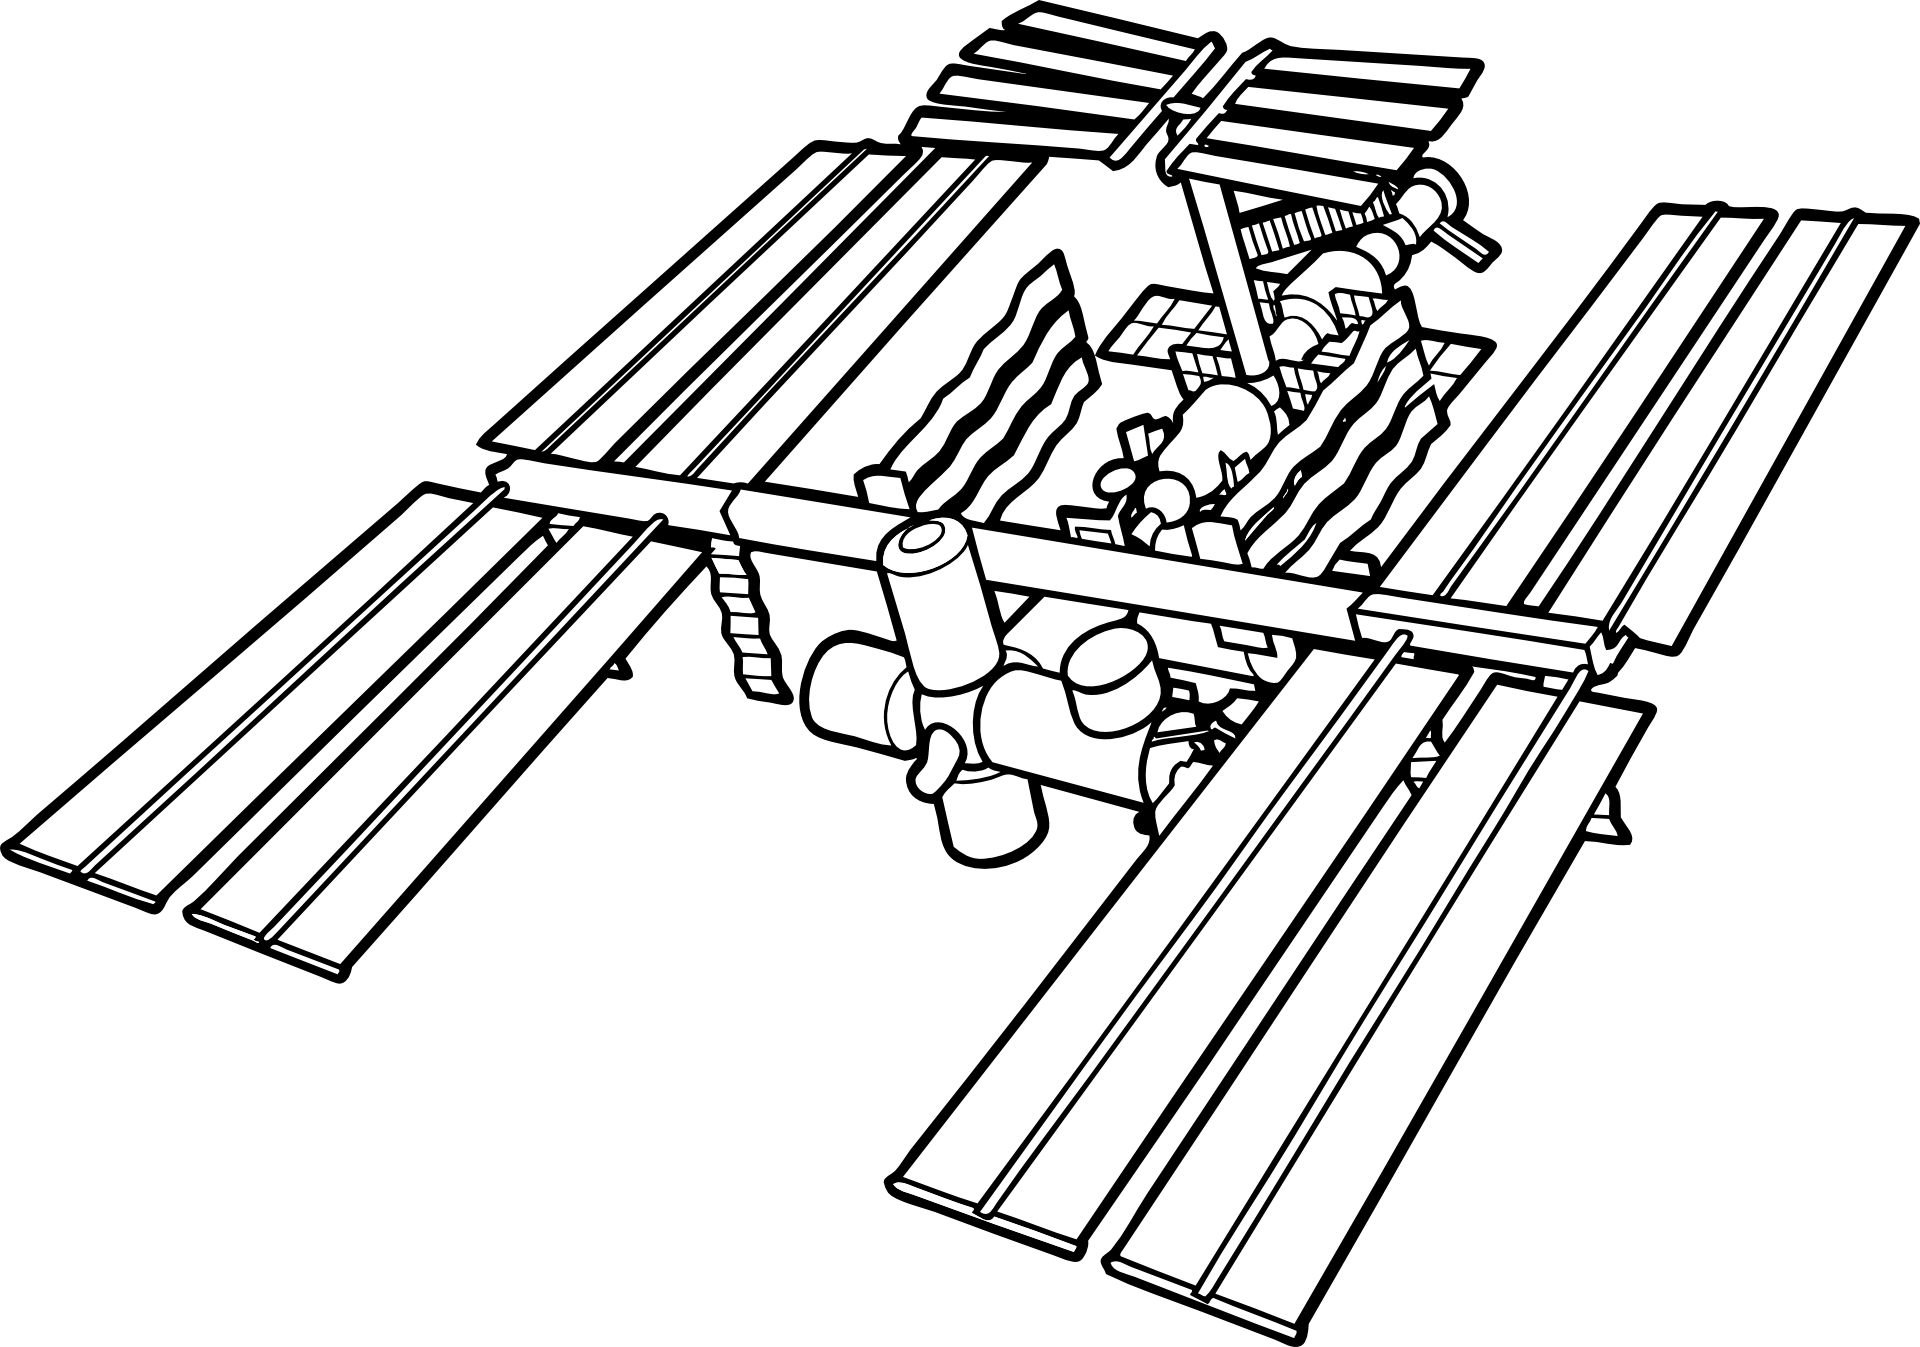 Drawing space station free image download